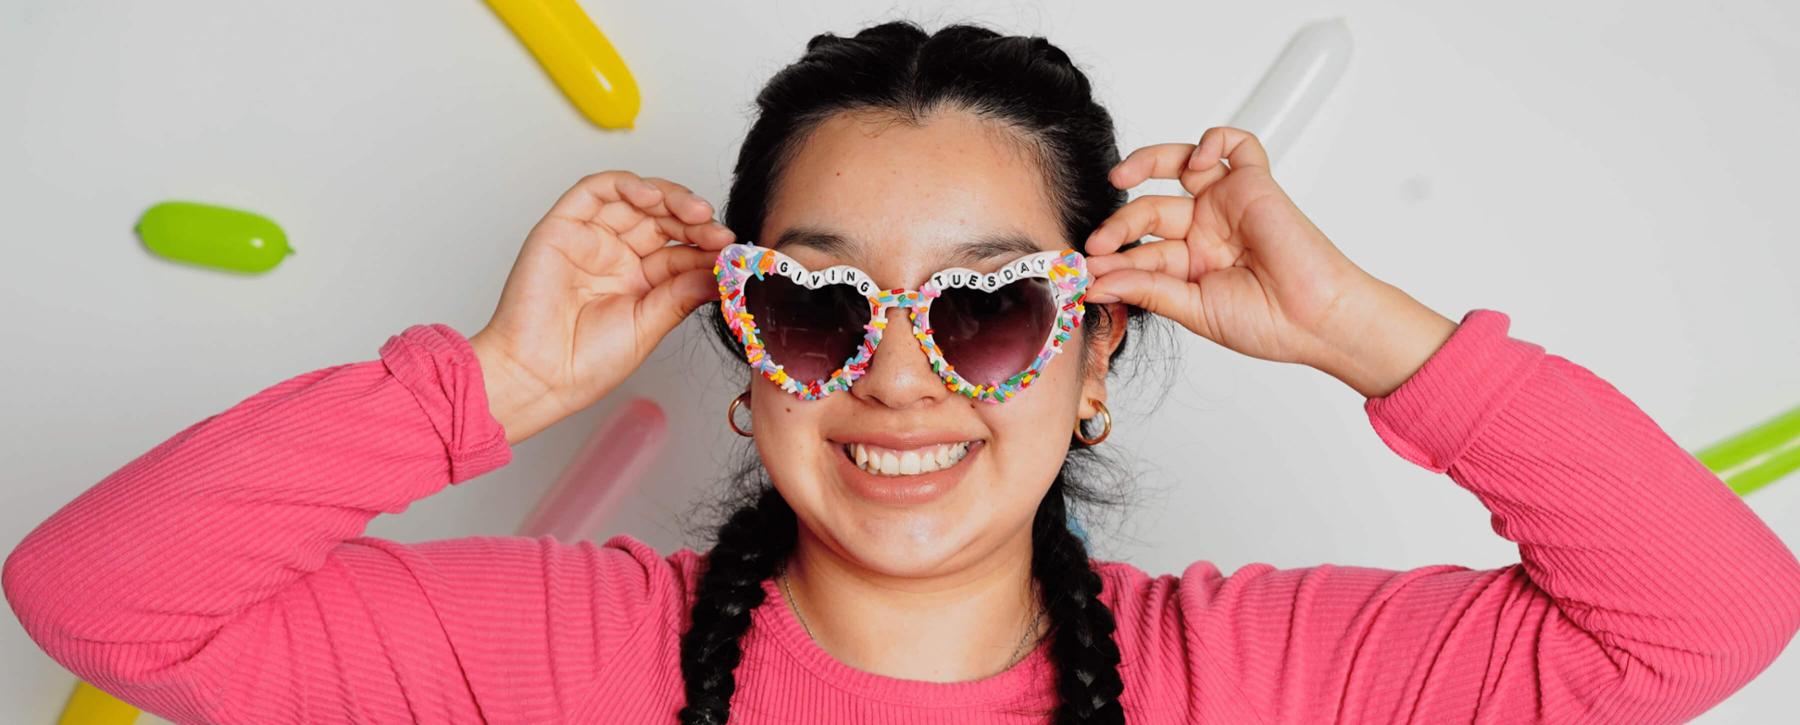 A student with two braids in a pink sweater is wearing sprinkle glasses that say "Giving Tuesday" in beads on them. She's standing in front of a white background with colored sprinkle balloons.